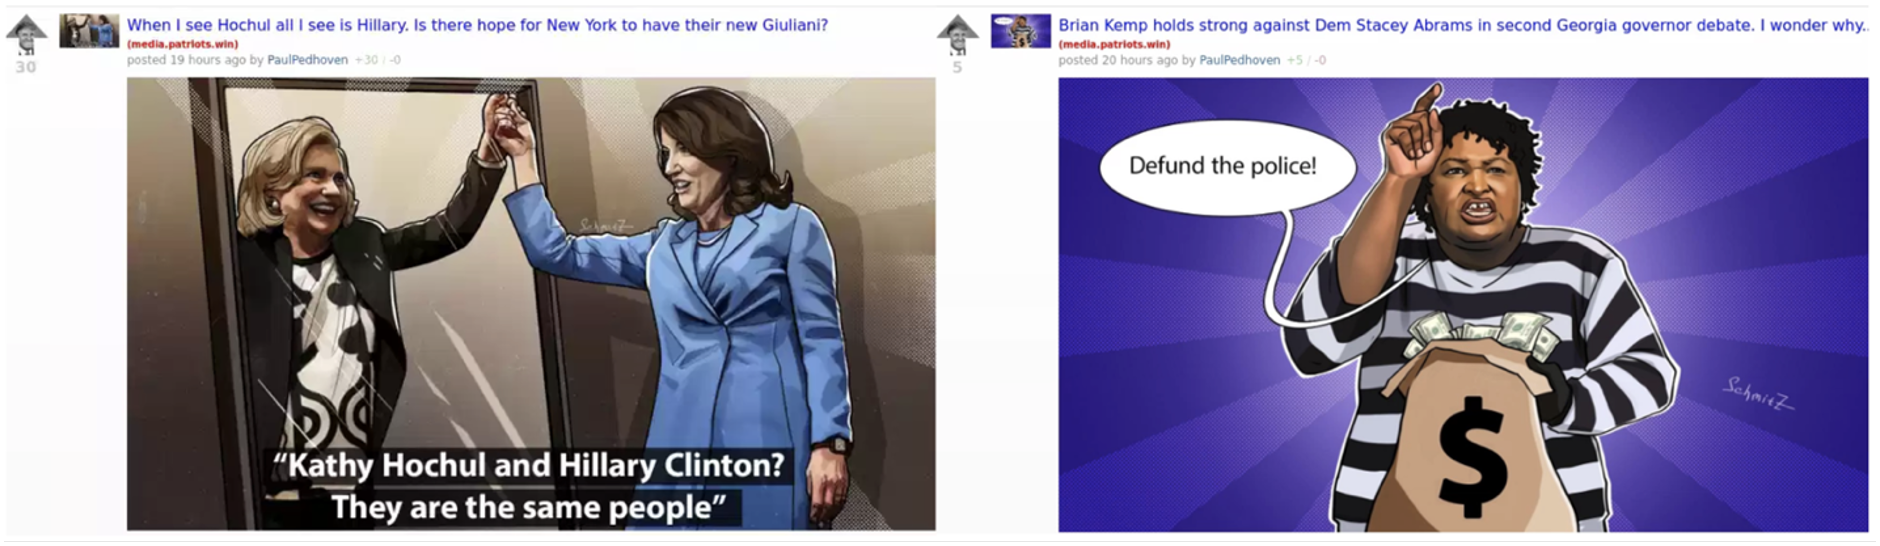 Example cartoons promoted by NAEBC, which targeted contested races in the midterm elections